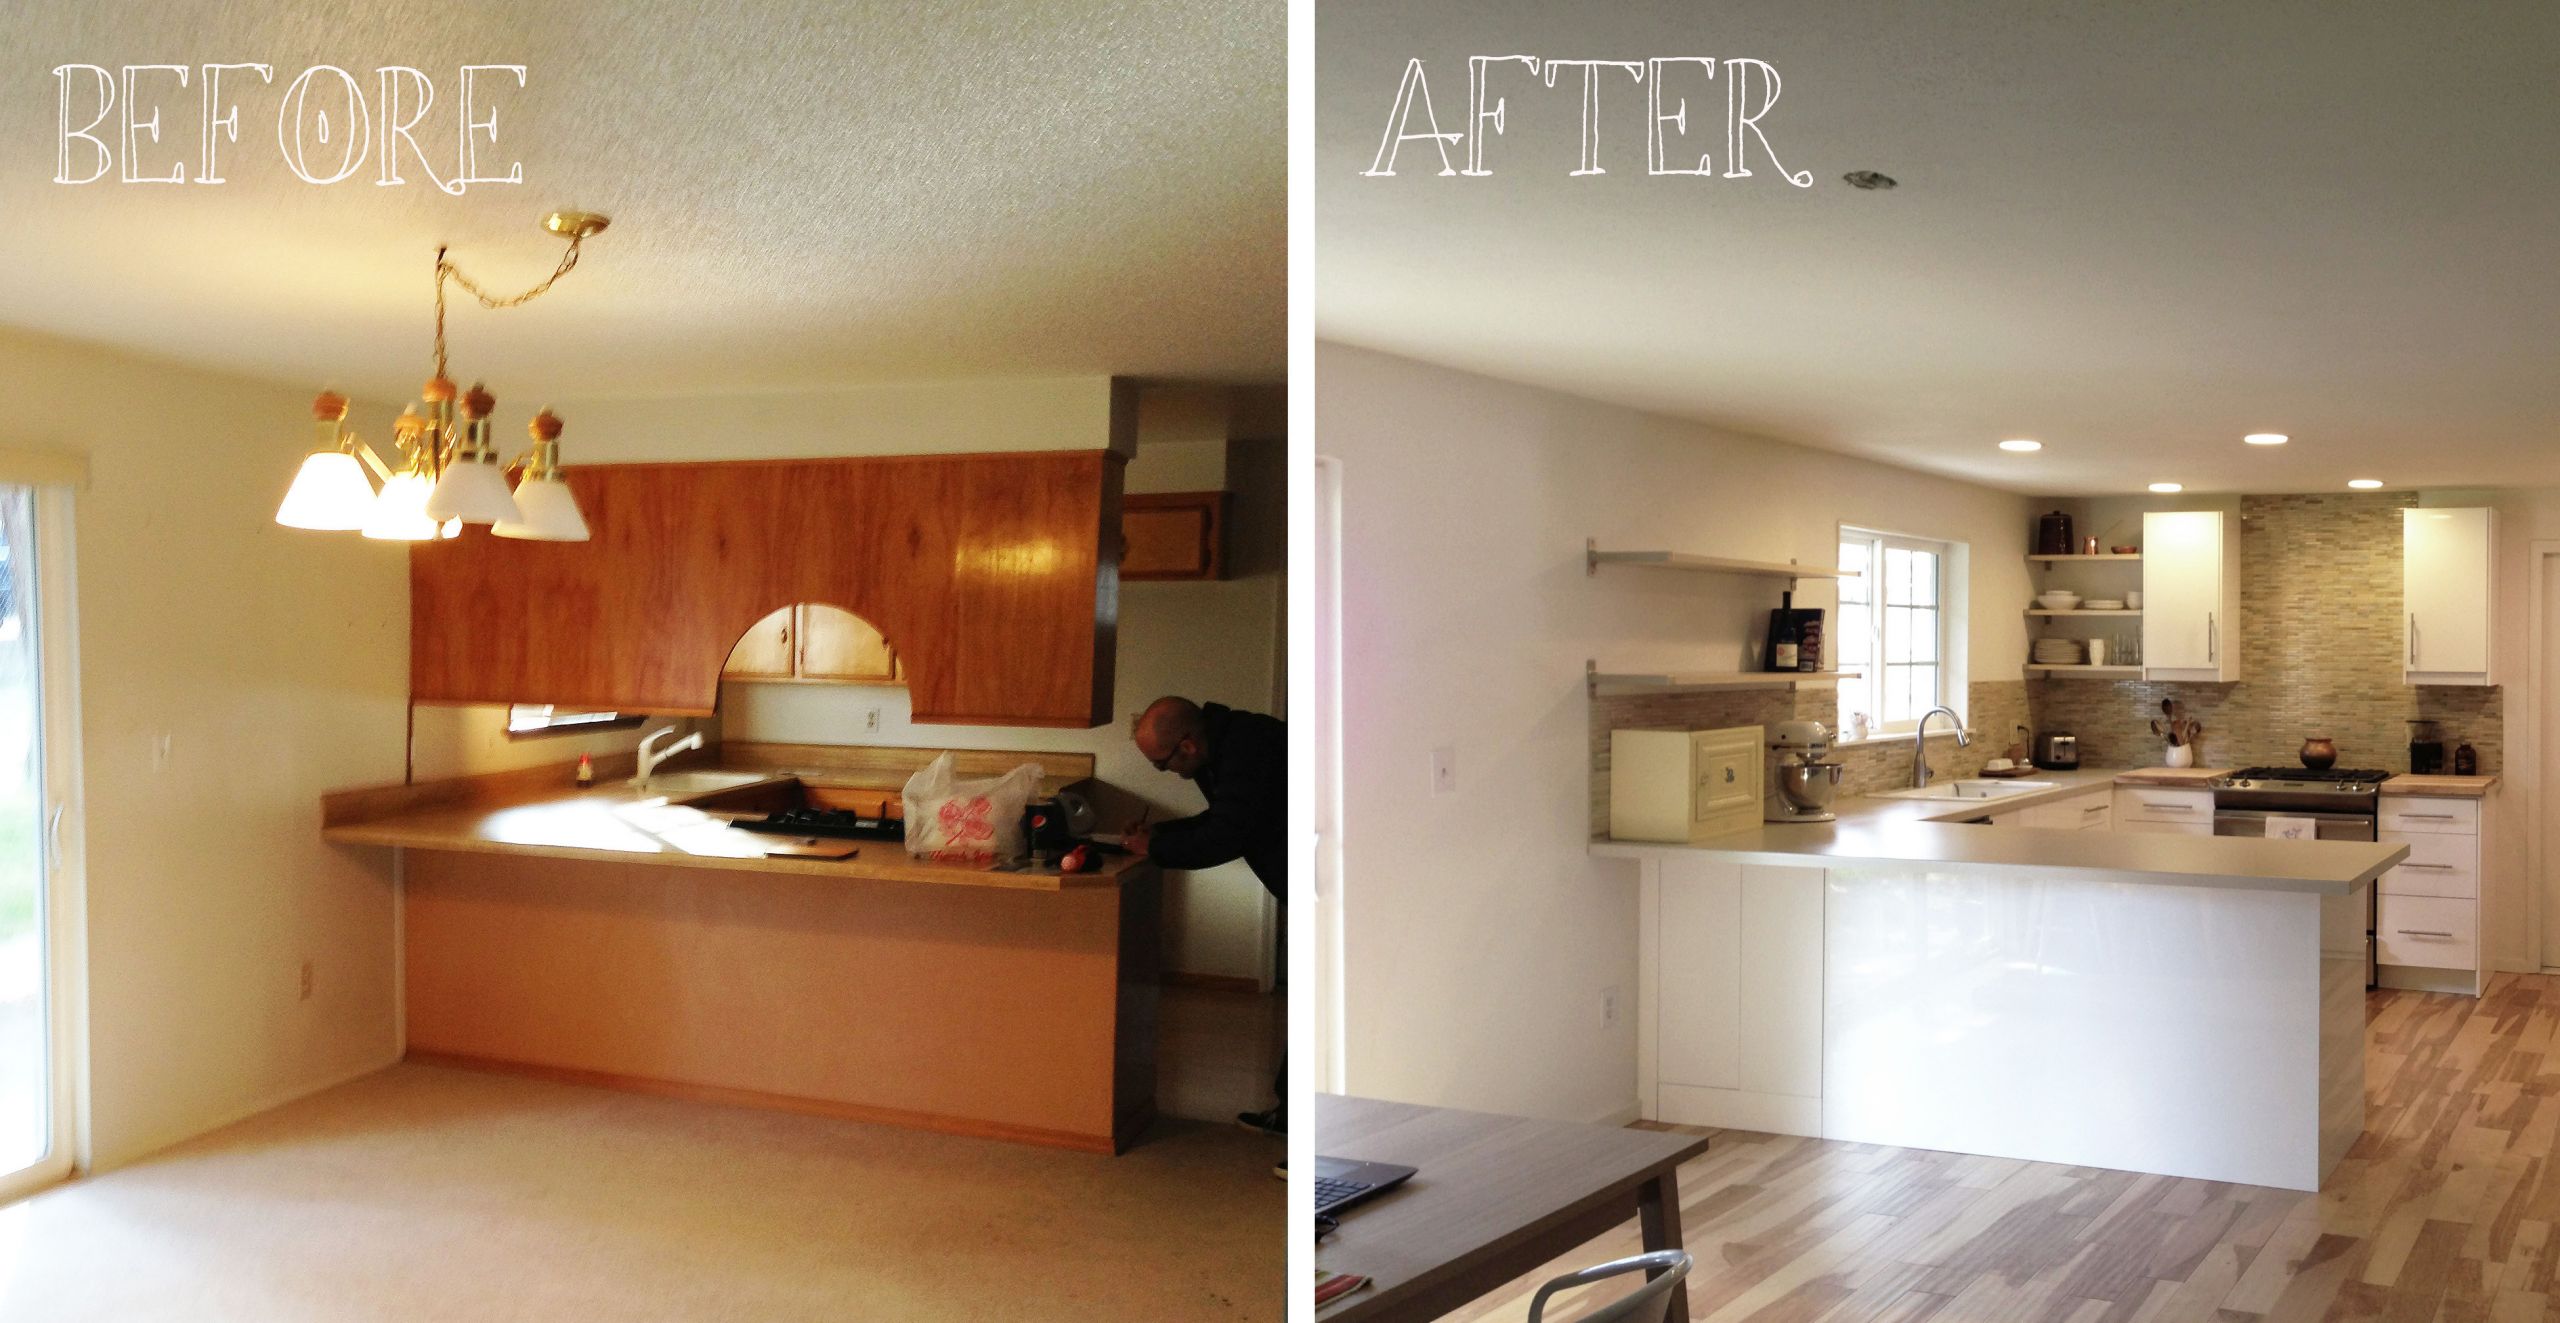 Remodeling Kitchen Before And After
 kitchen remodel